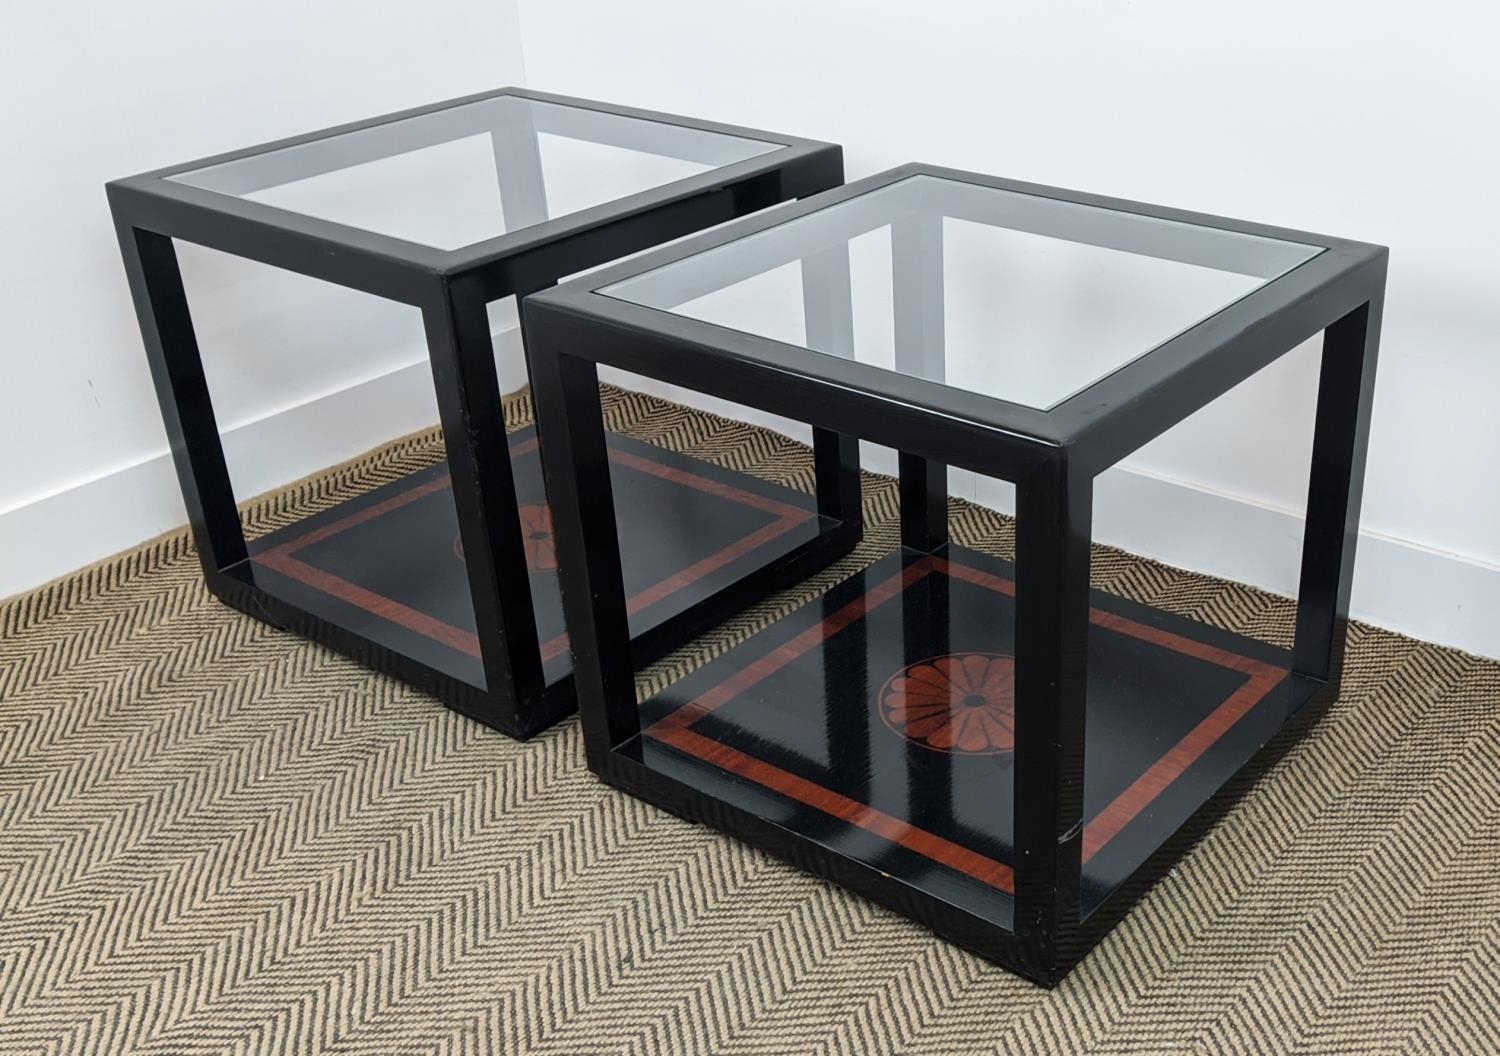 LAMP TABLES, a pair, black lacquer and inlaid with inset square glass tops, 55cm H x 60cm W. - Image 7 of 16